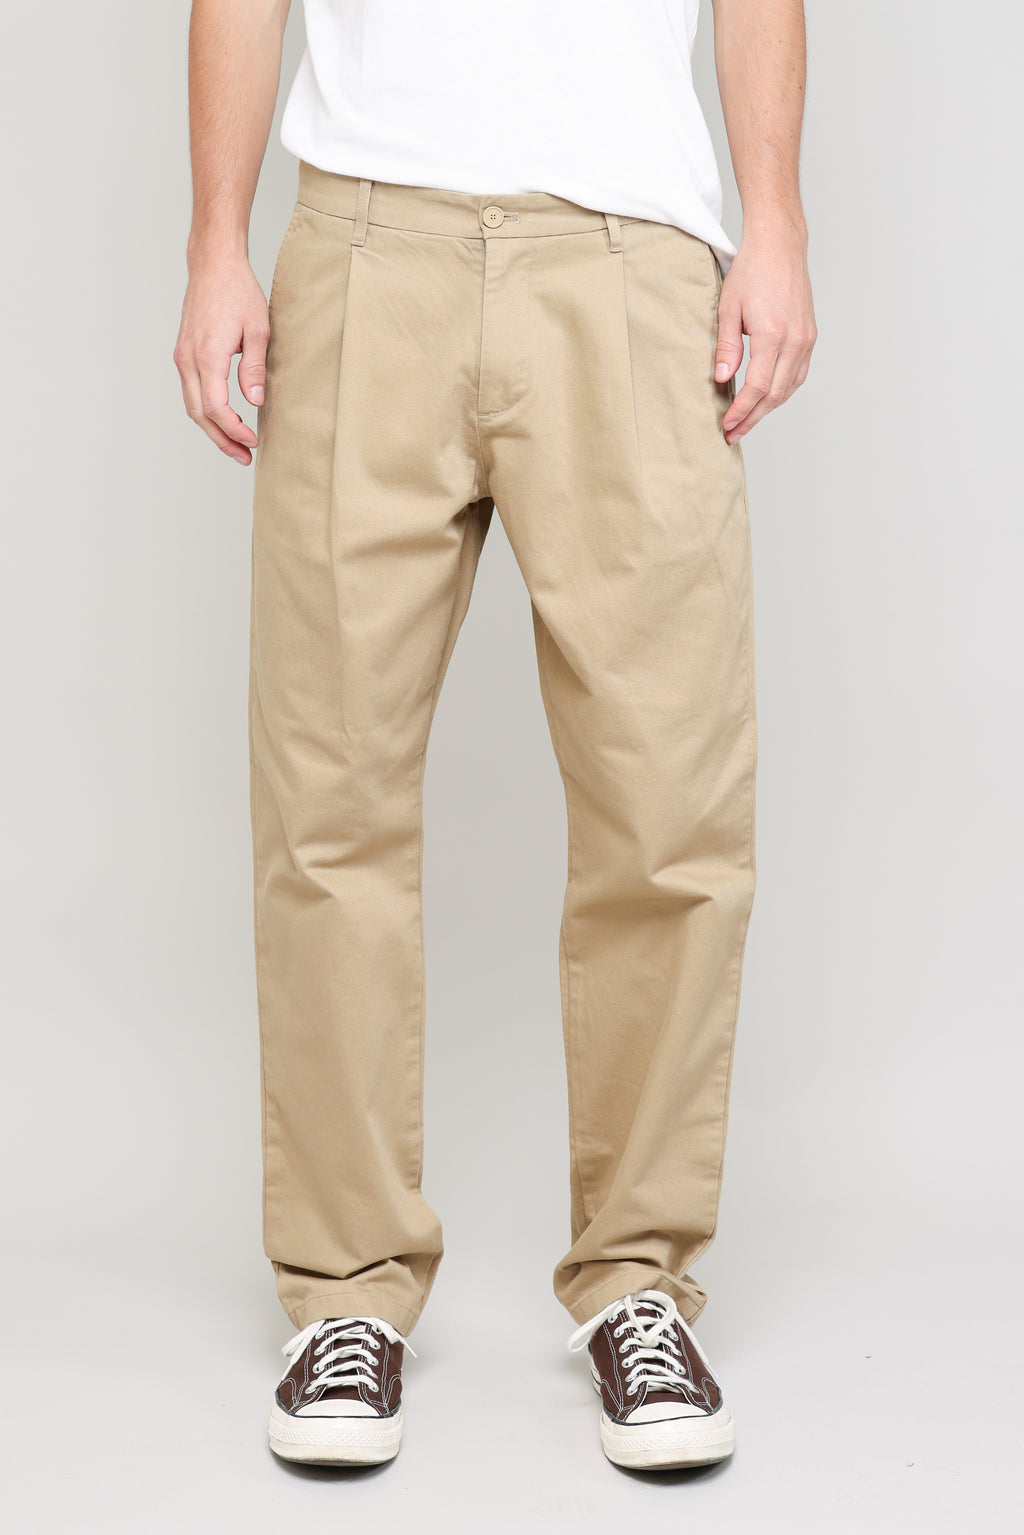 Pleated Chino Vintage French Drill in Khaki 02